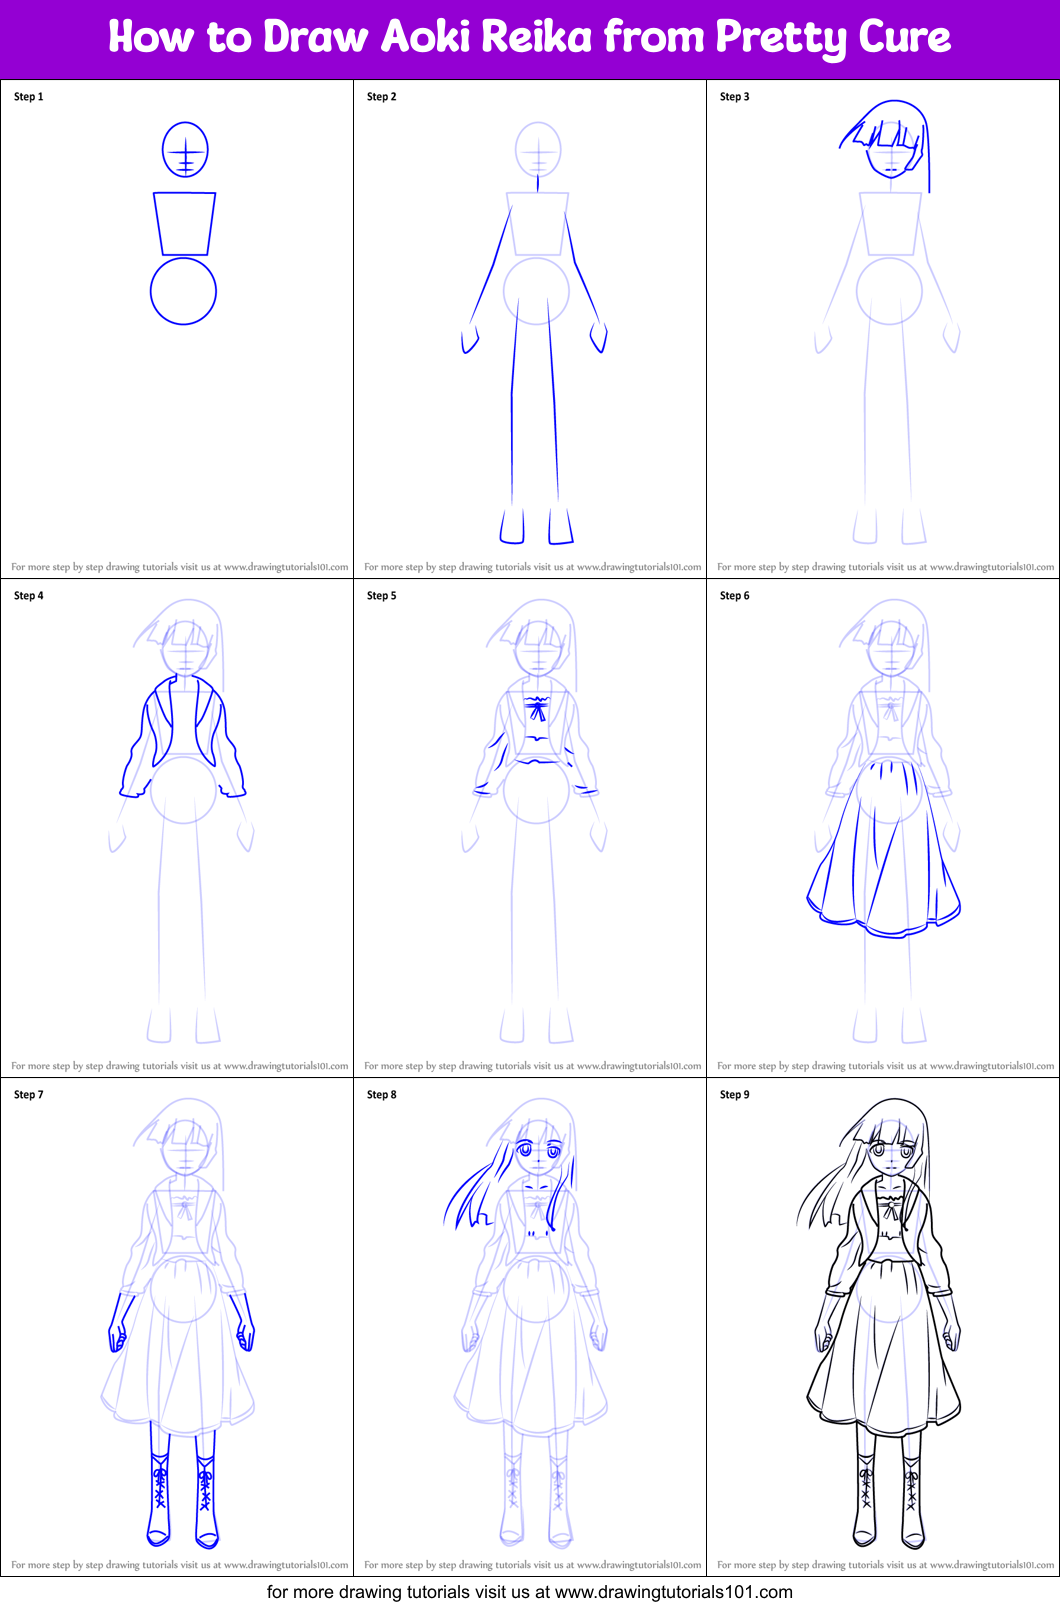 How to Draw Aoki Reika from Pretty Cure (Pretty Cure) Step by Step ...